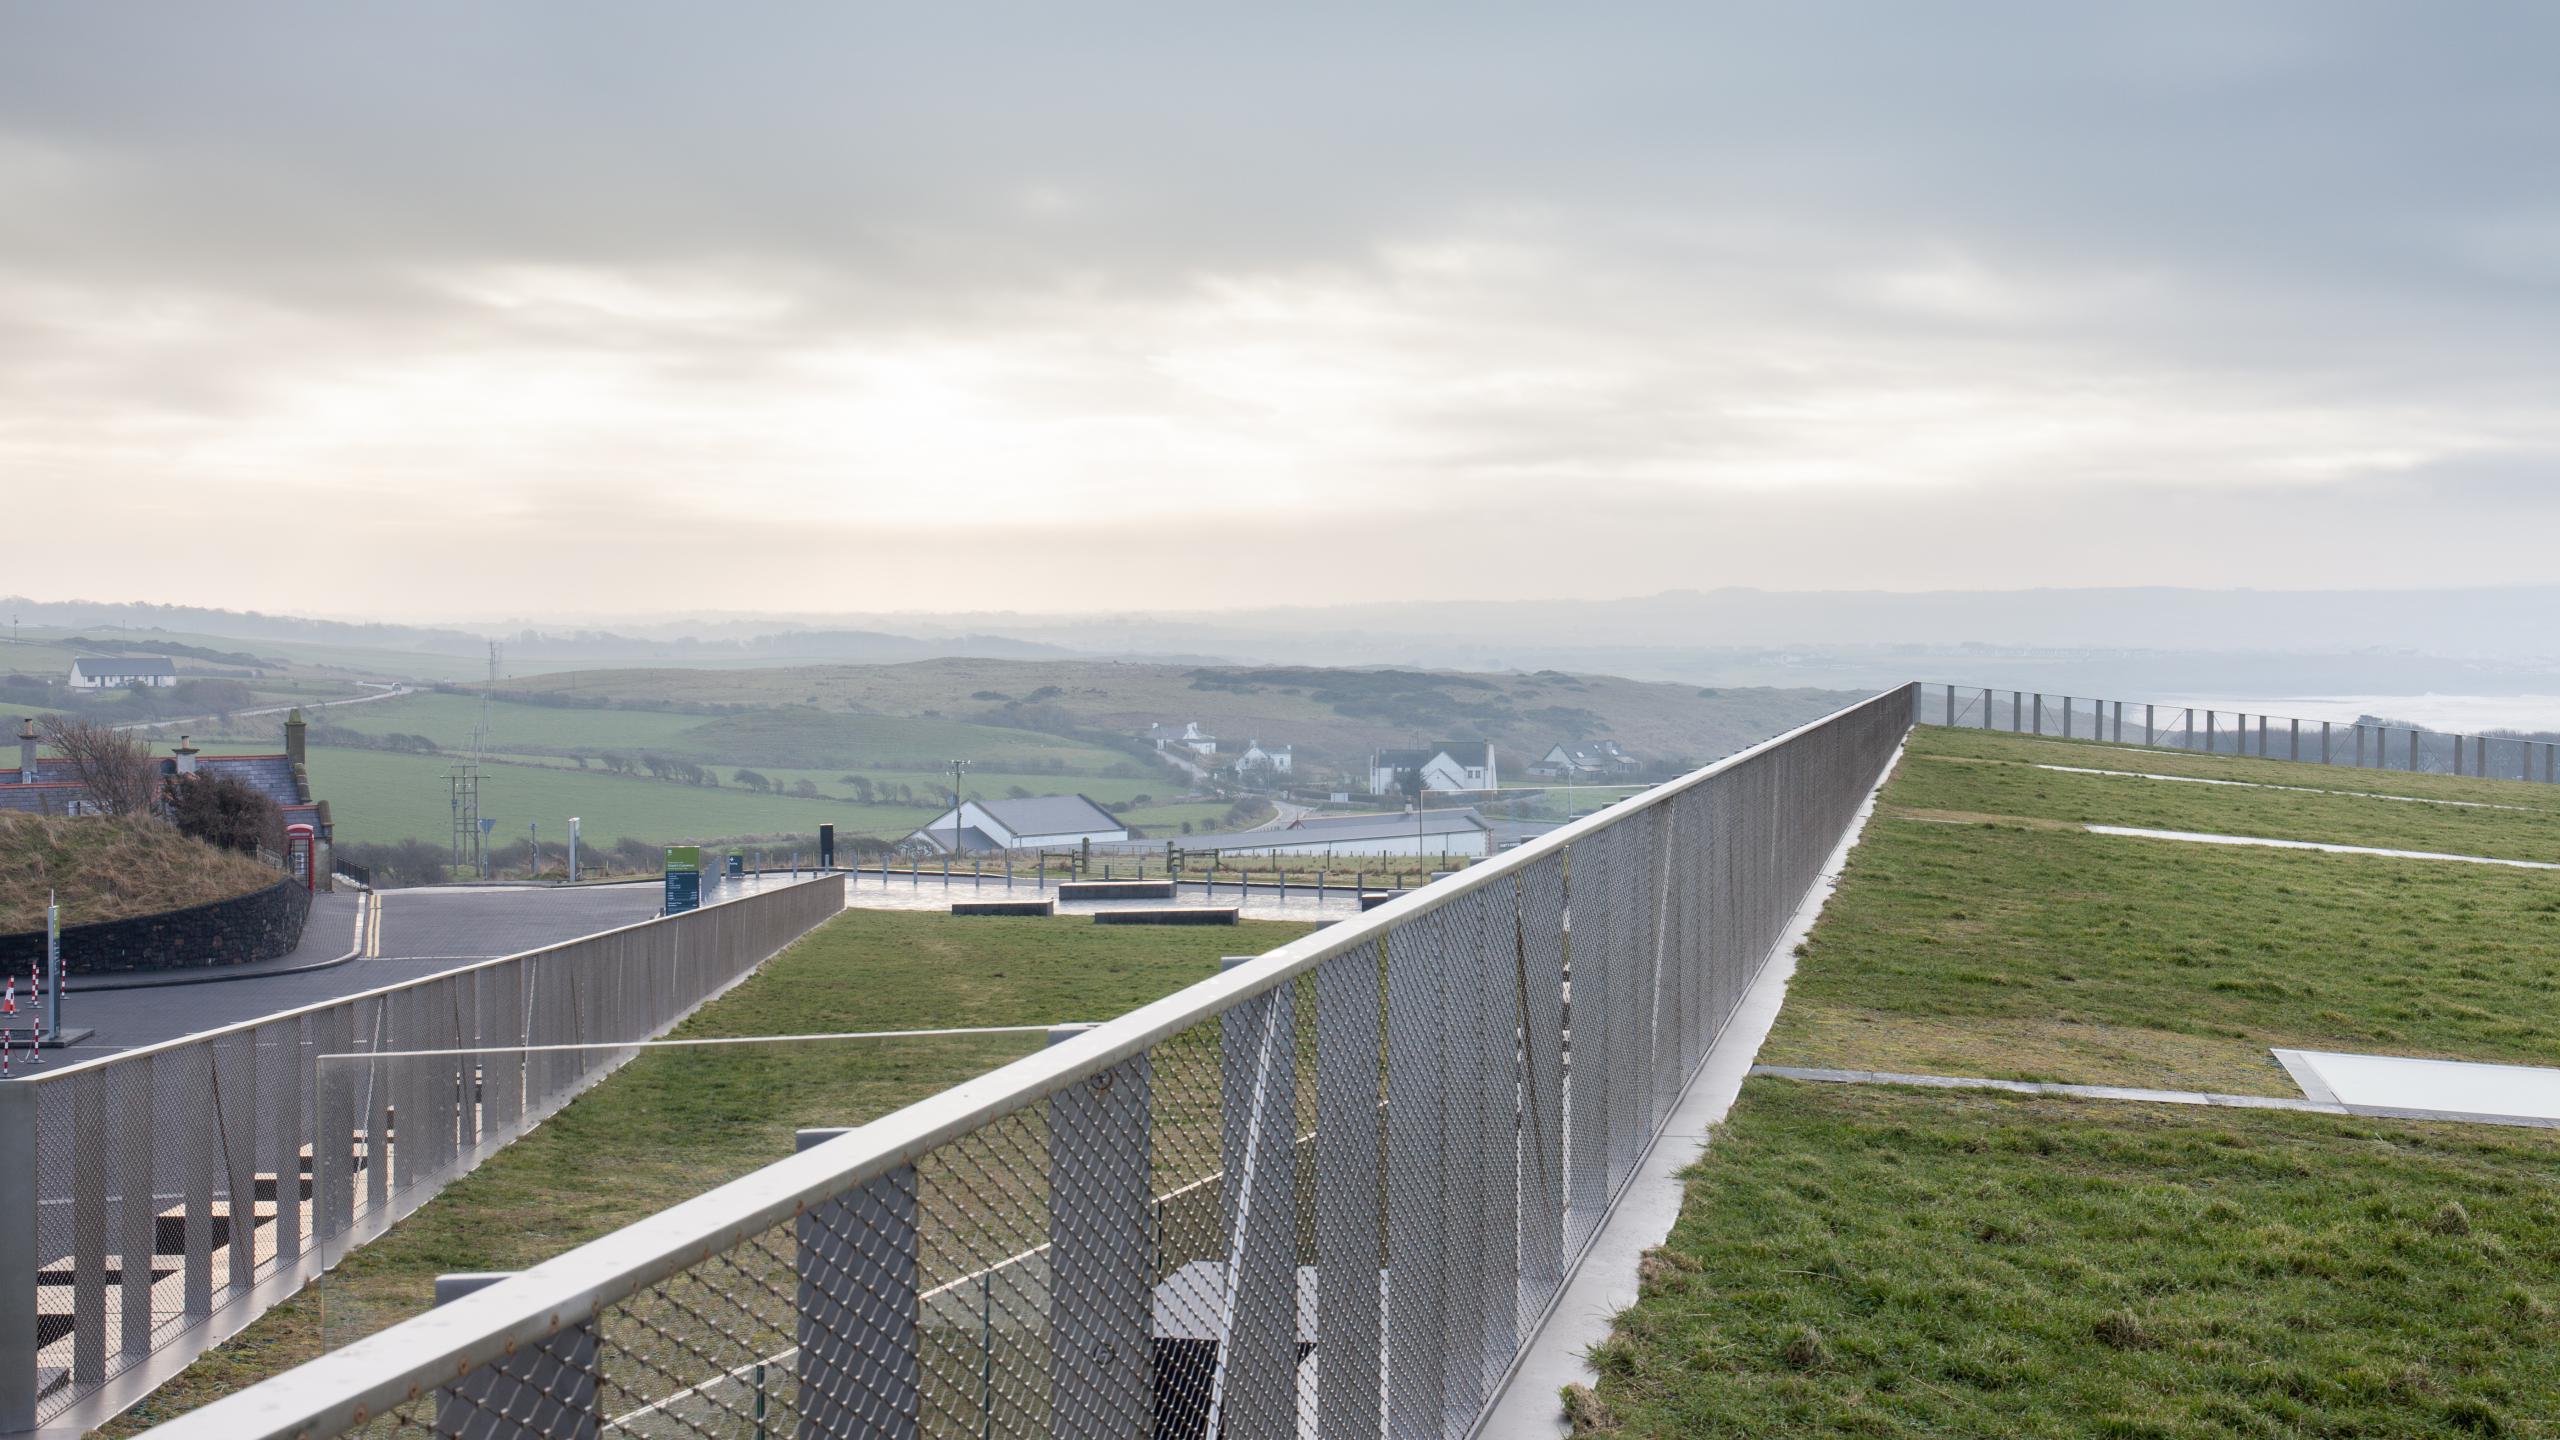 Photograph of Giants Causway Visitor Centre, designed by Heneghan Peng Architects and located in Bushmills, United Kingdom